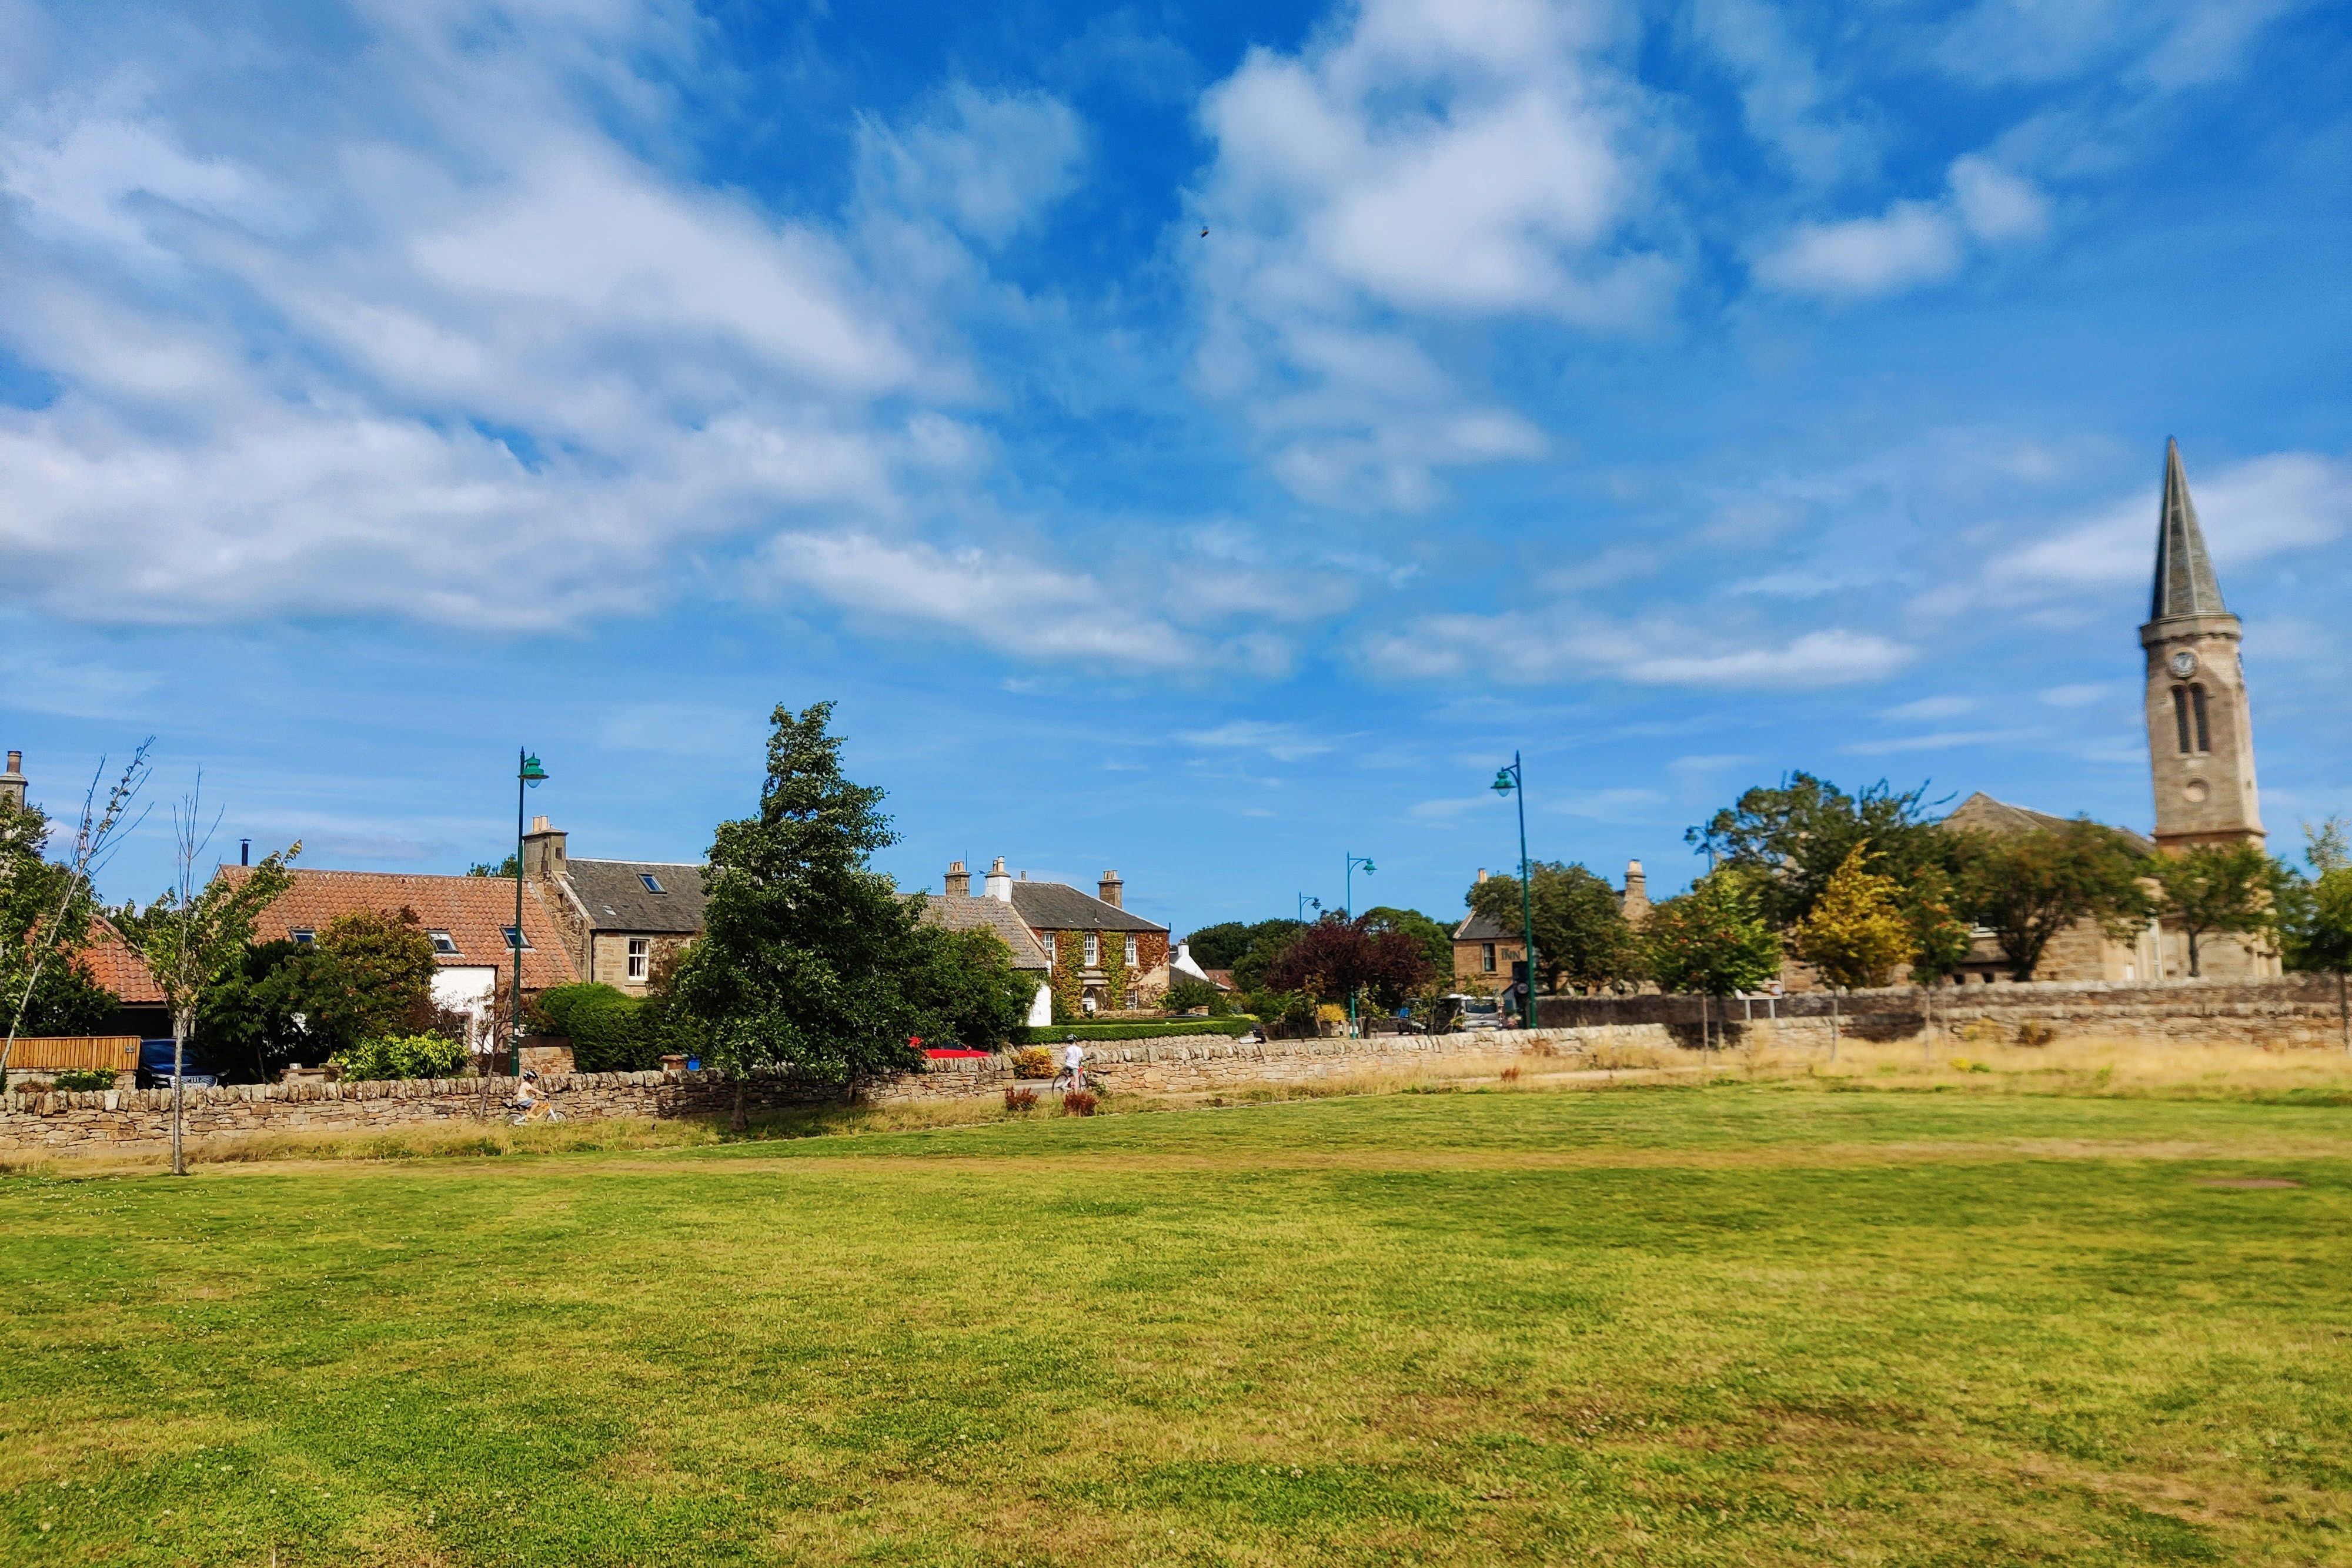 Photo of Kingsbarns village green with Kingsbarns church in the background 